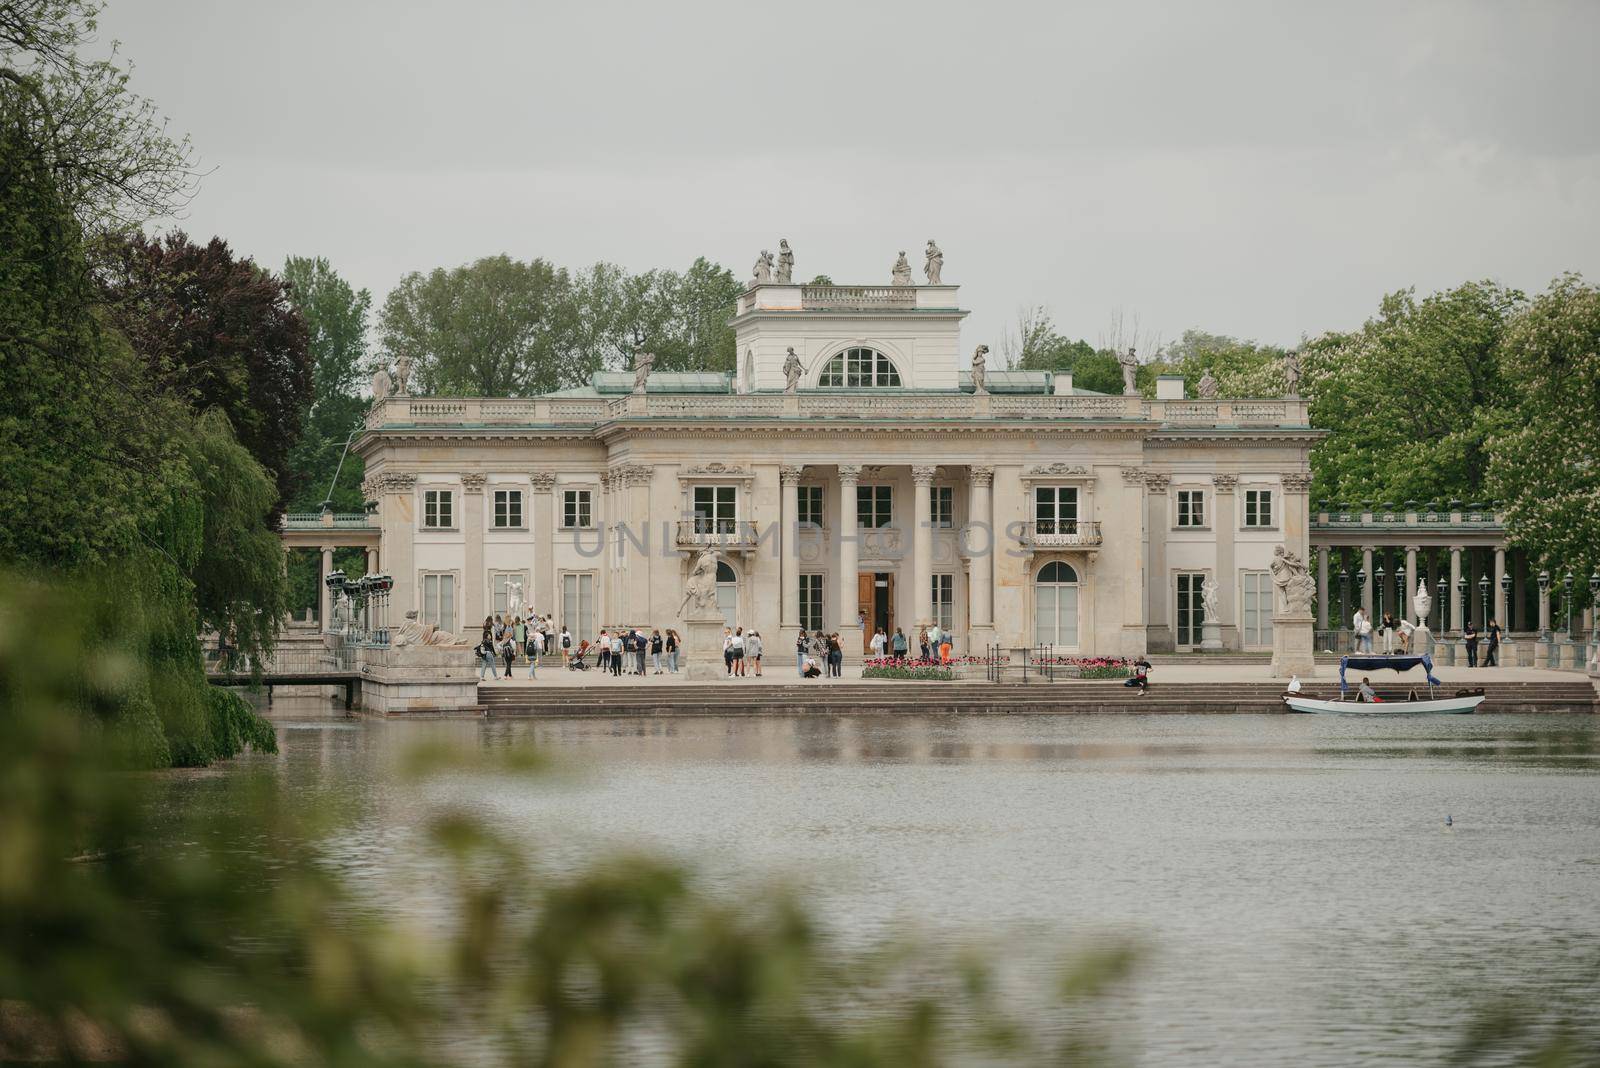 Warsaw, Poland - MAY 12, 2022: The view from the water of Palace on the Isle at noon